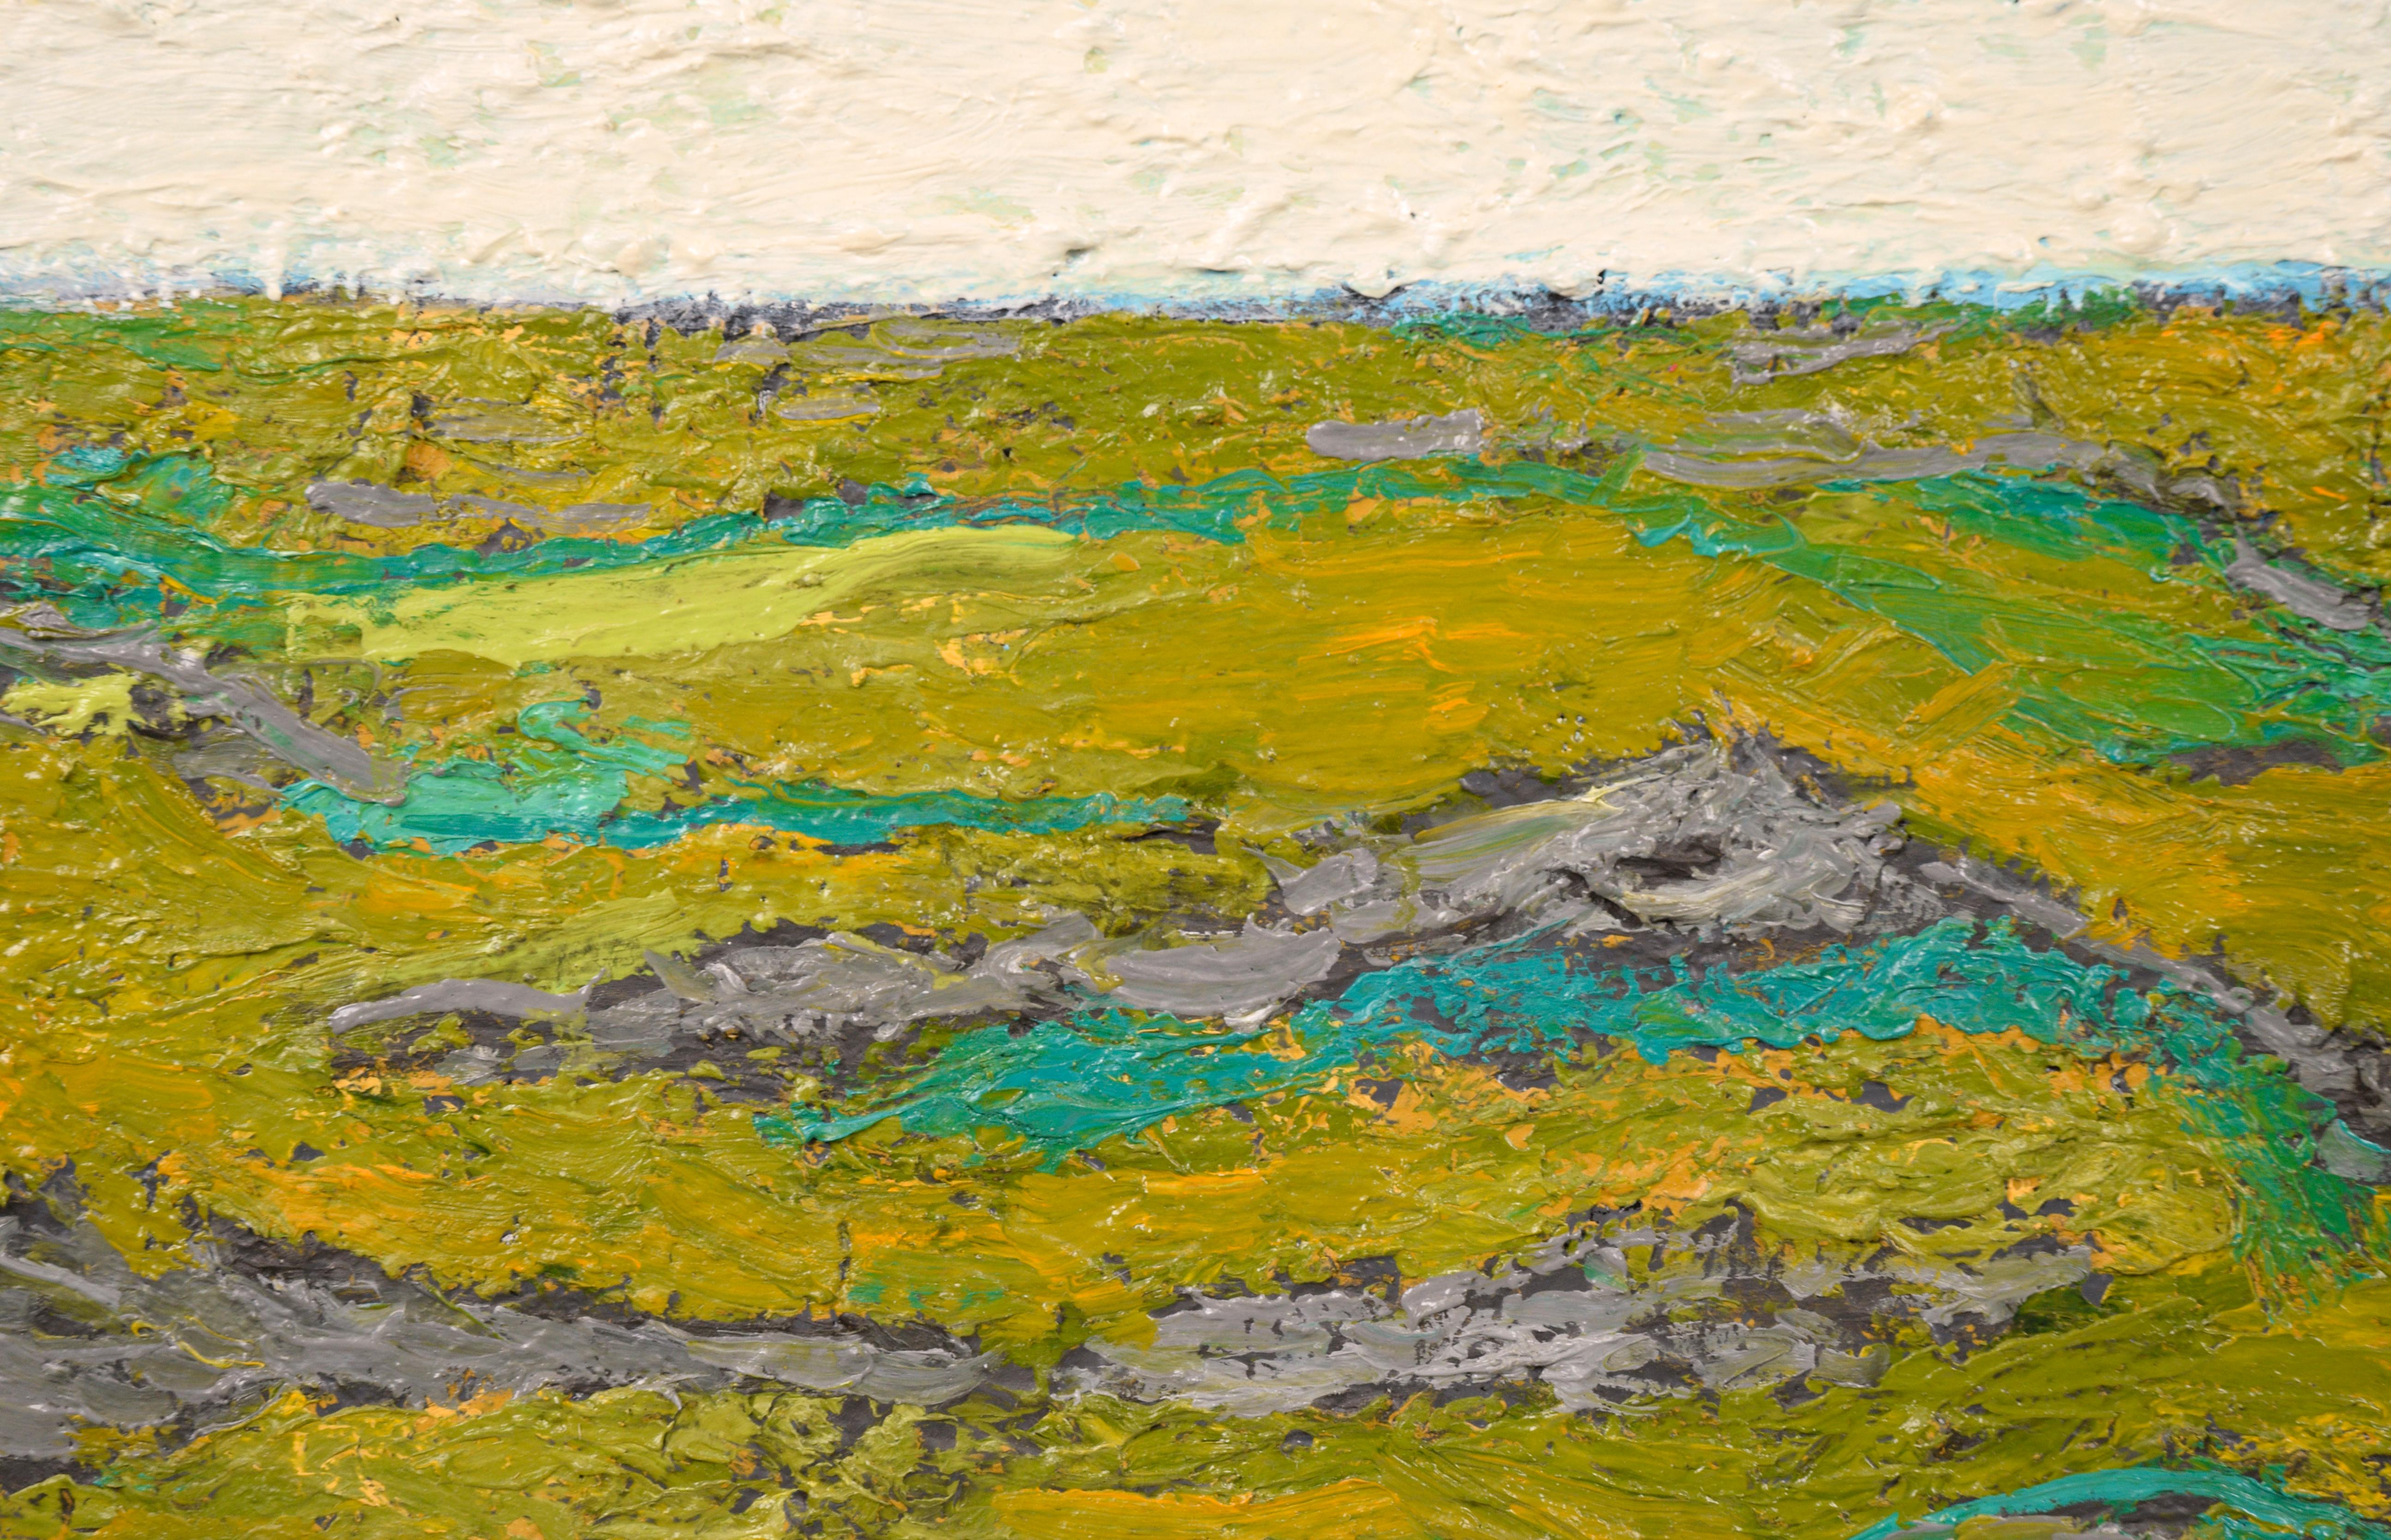 Contemporary Abstract Colorfield Landscape in Cream & Green - White Landscape Painting by Michael Pauker 